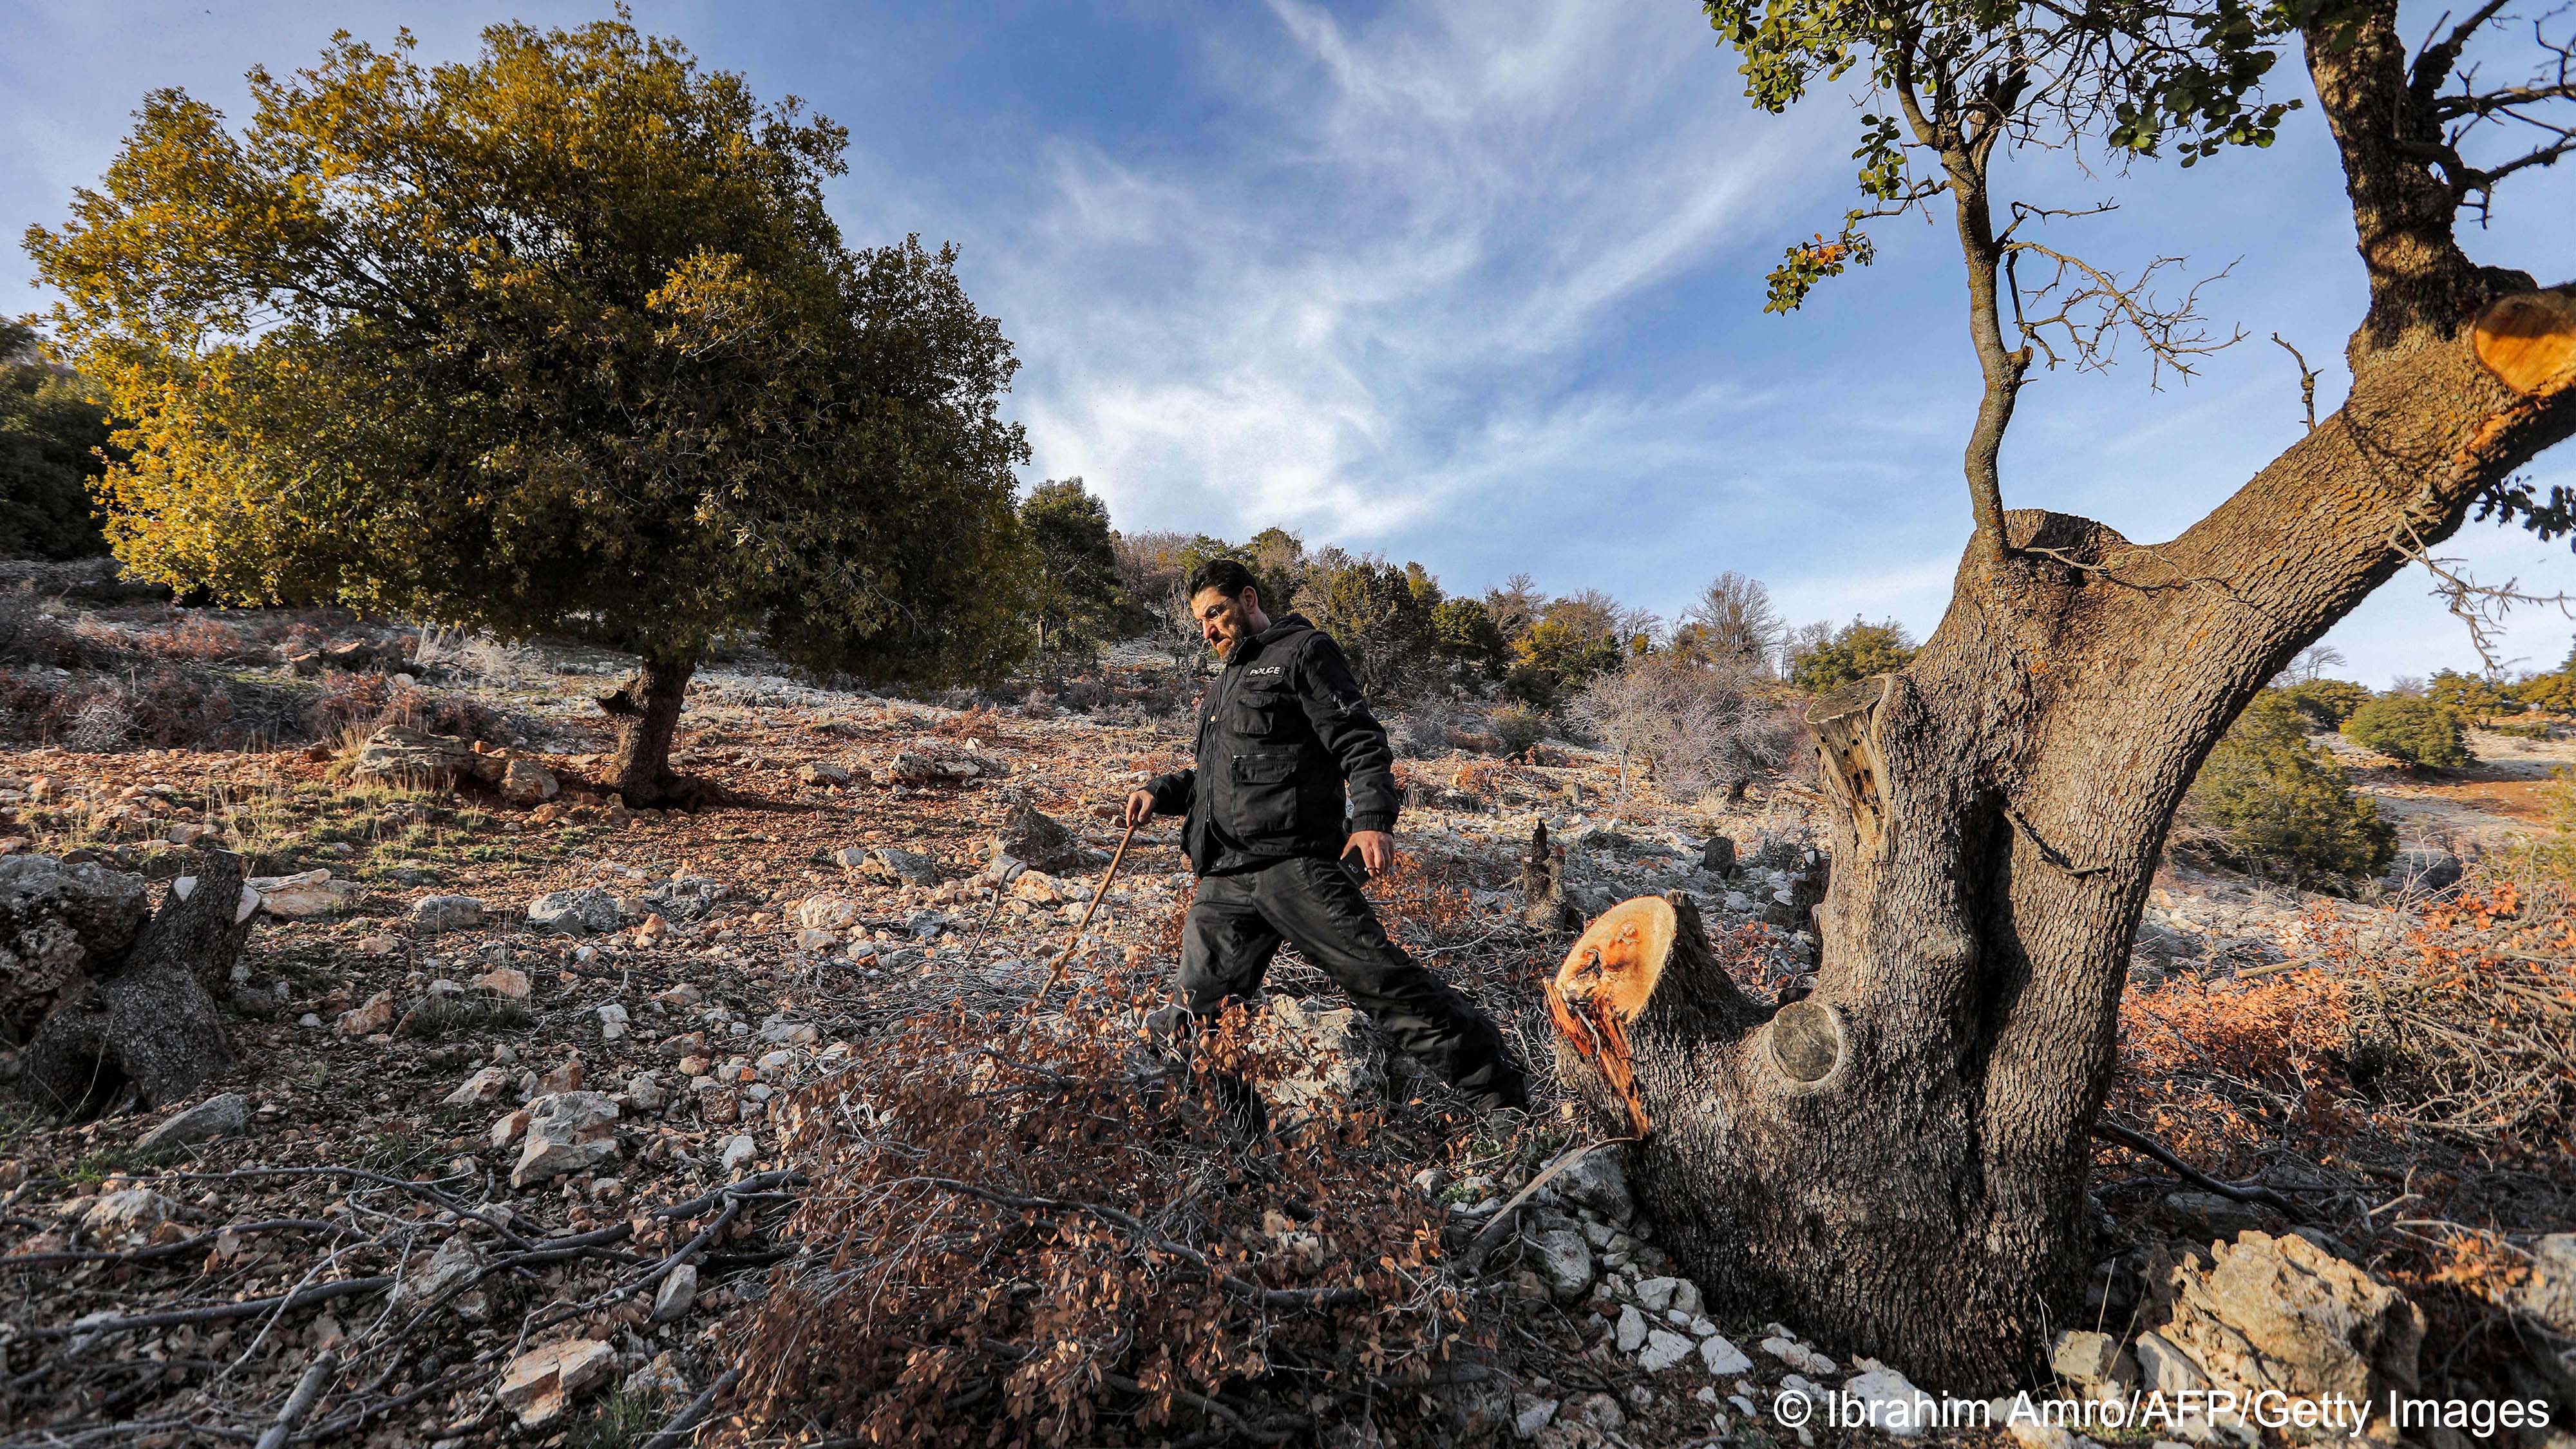 Man stands amid a grove of trees (image: Ibrahim AMRO/AFP)